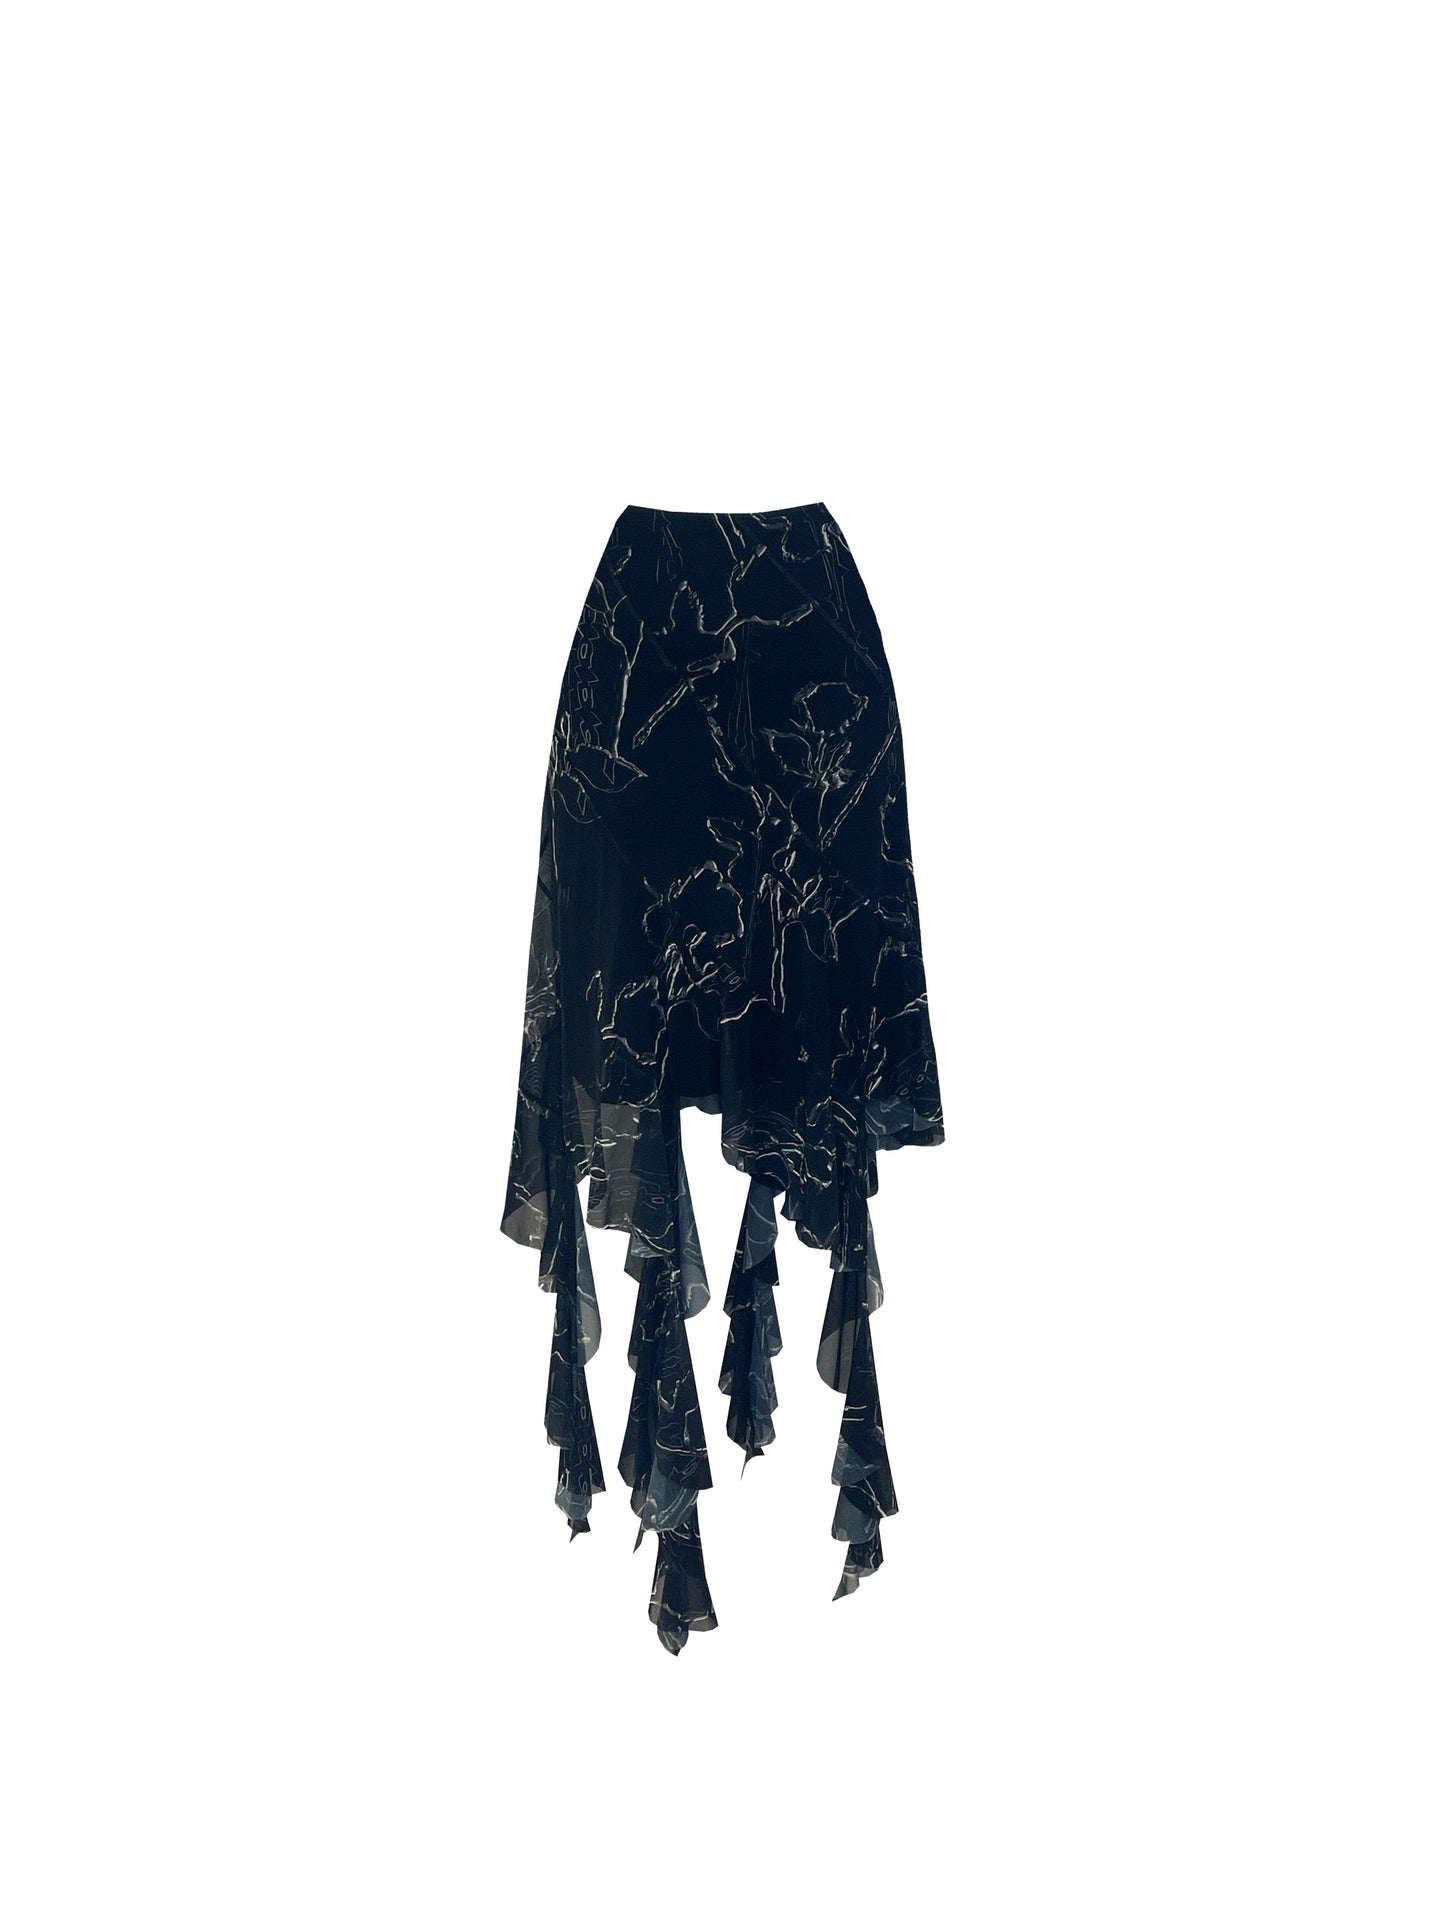 The Silver Rose and Thorn Skirt